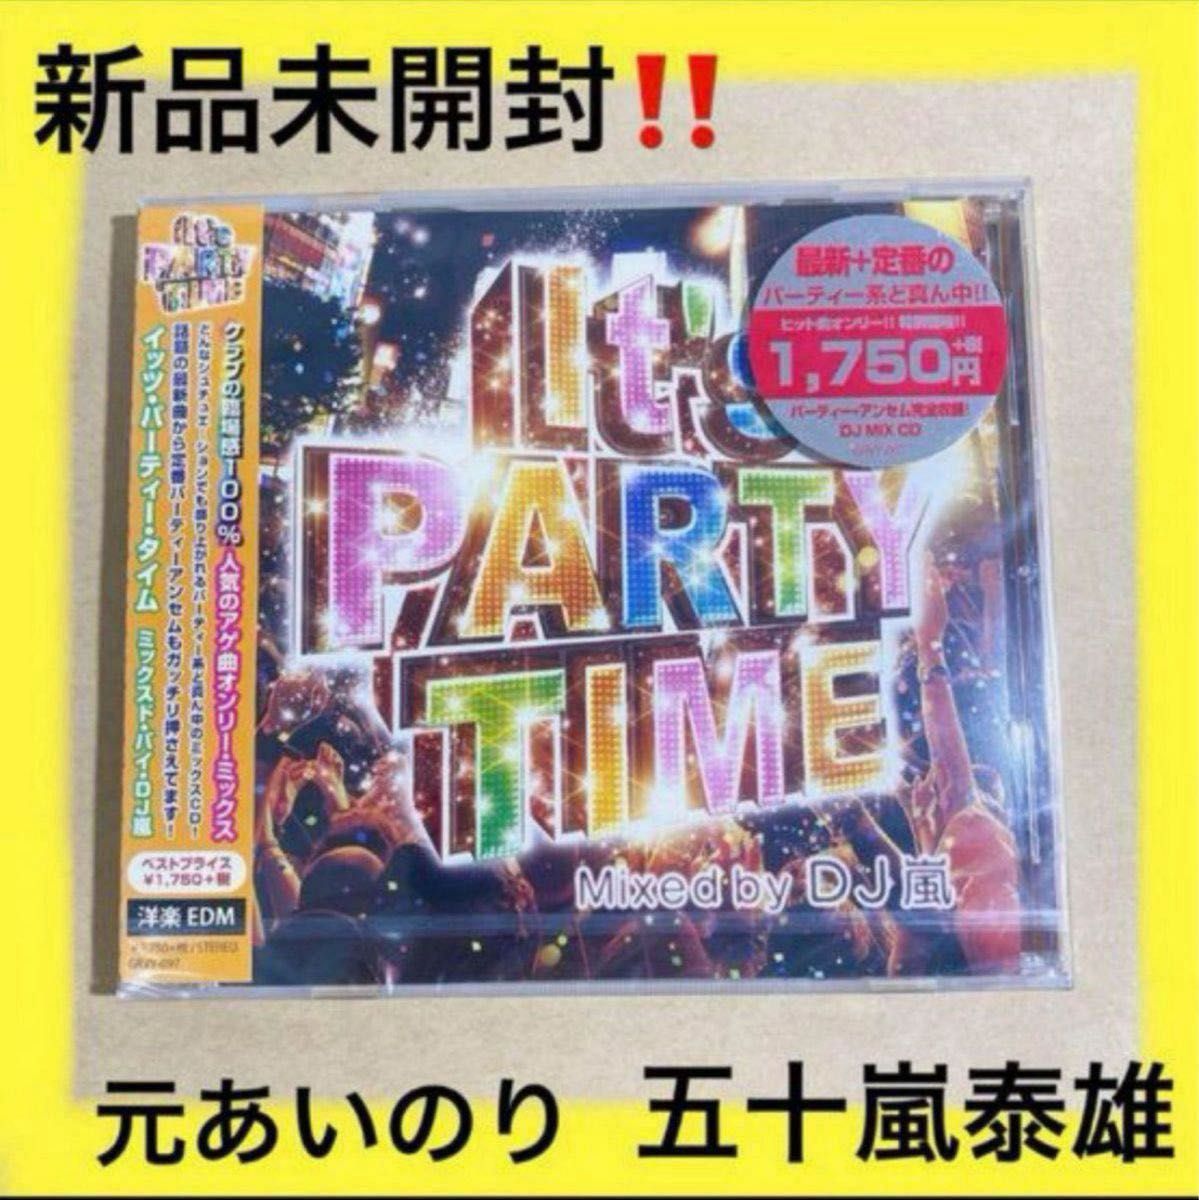 〜60%off〜五十嵐泰雄 元あいのり It's PARTY TIME Mixed by DJ 嵐 CD DJ嵐 EDM クラブ